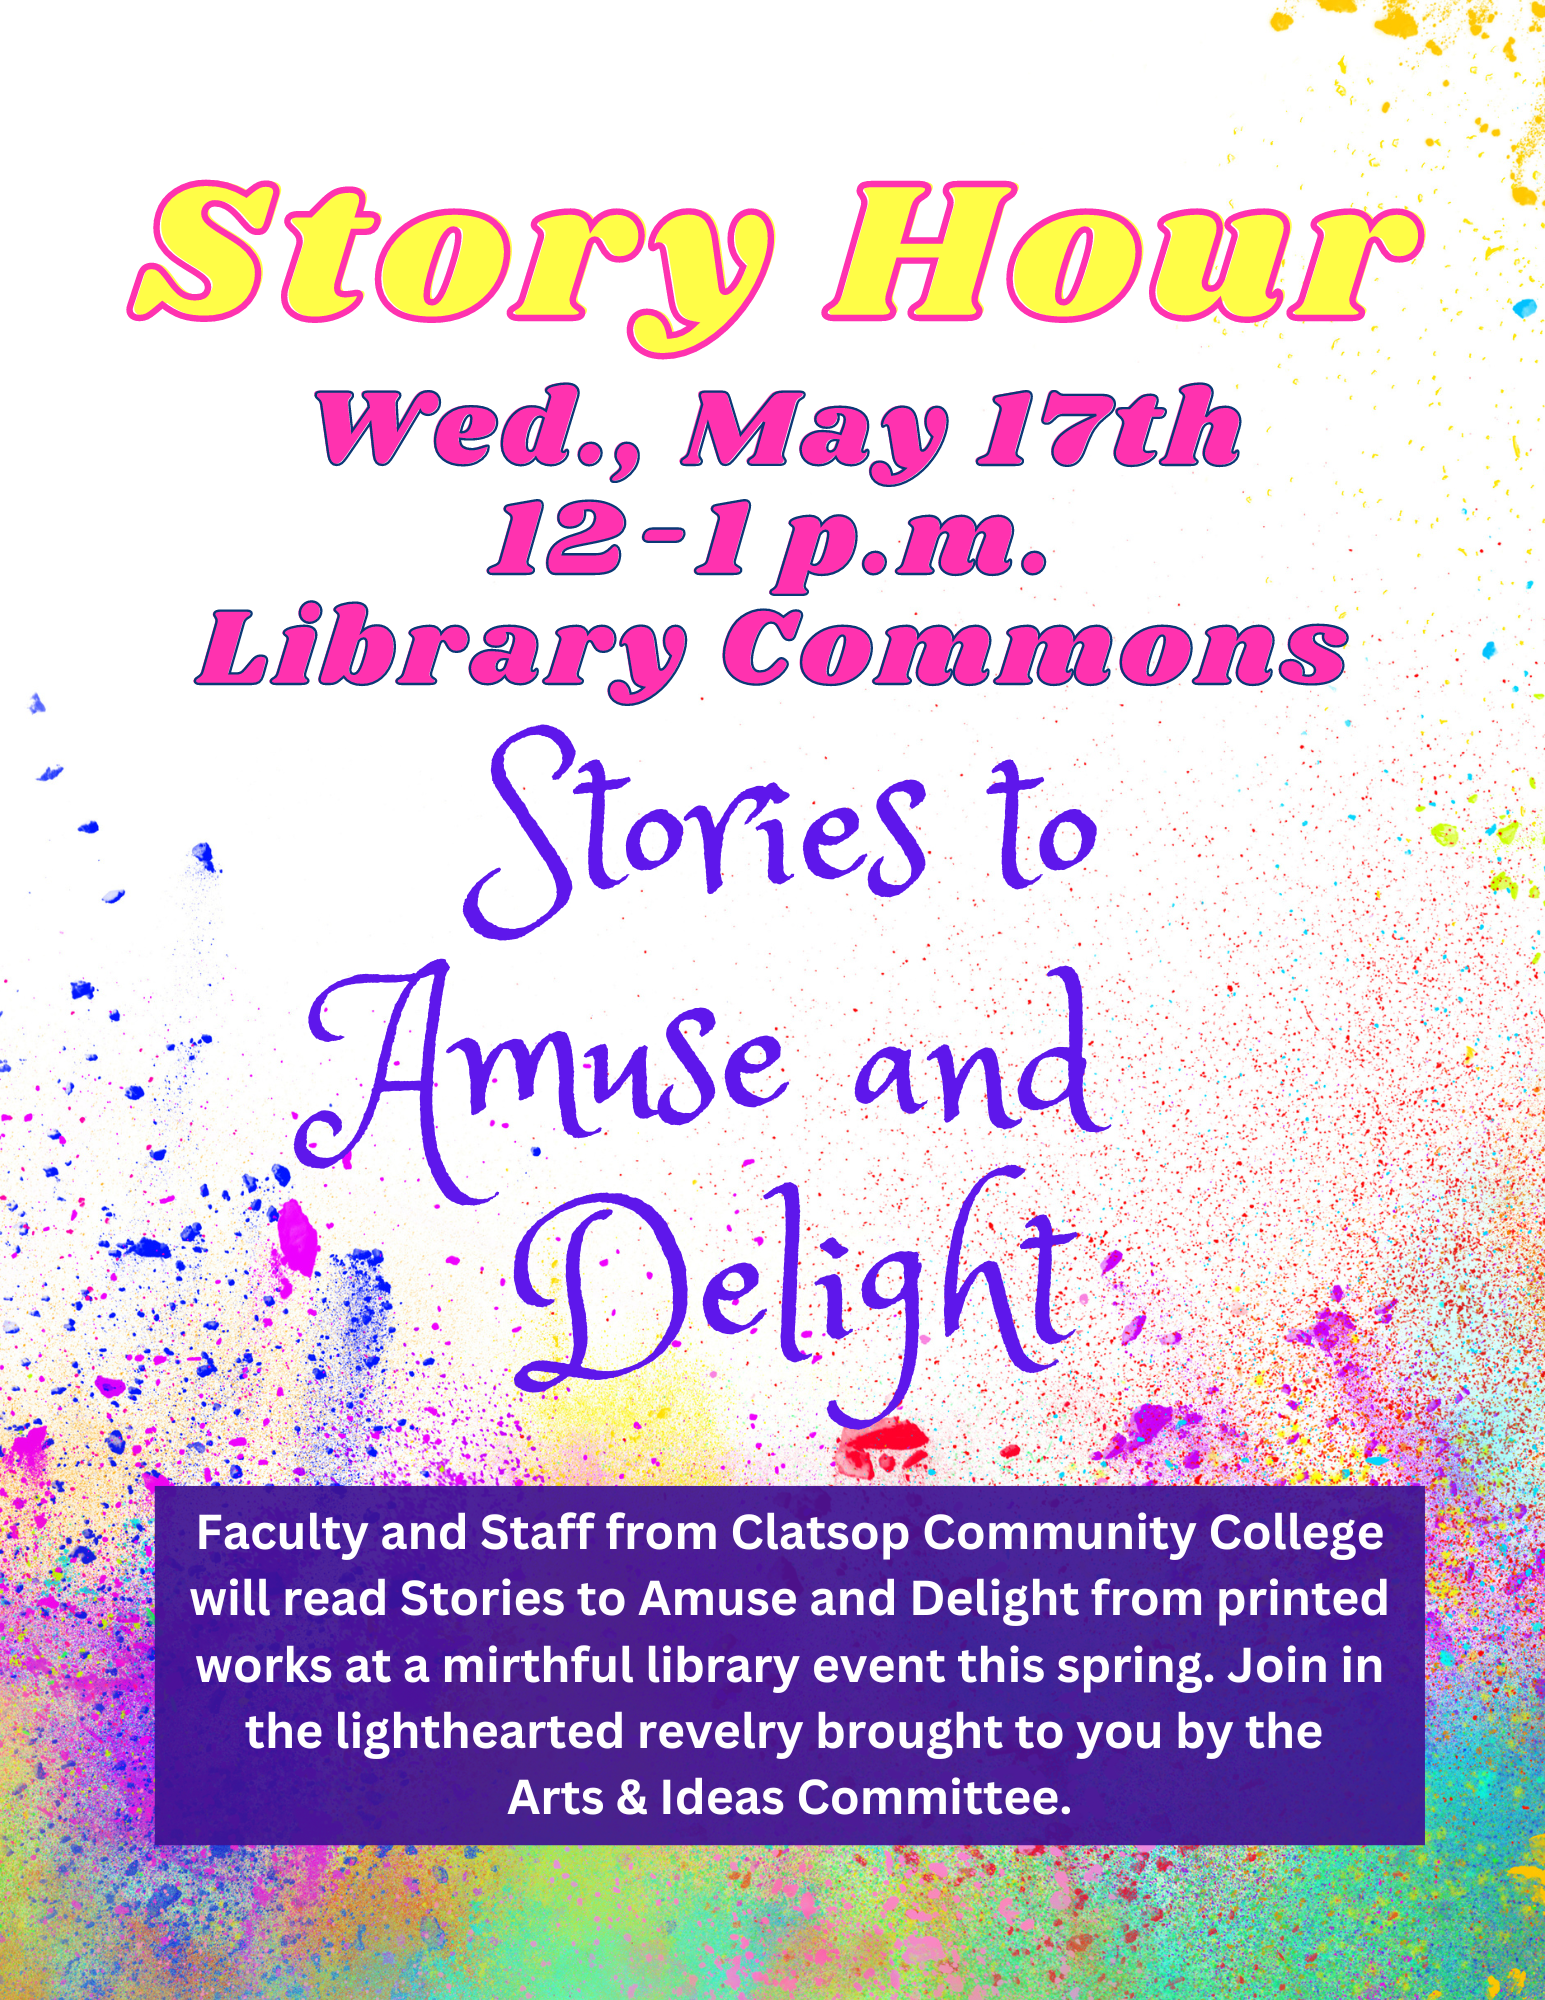 Story Hour will be May 17th at noon in the library commons